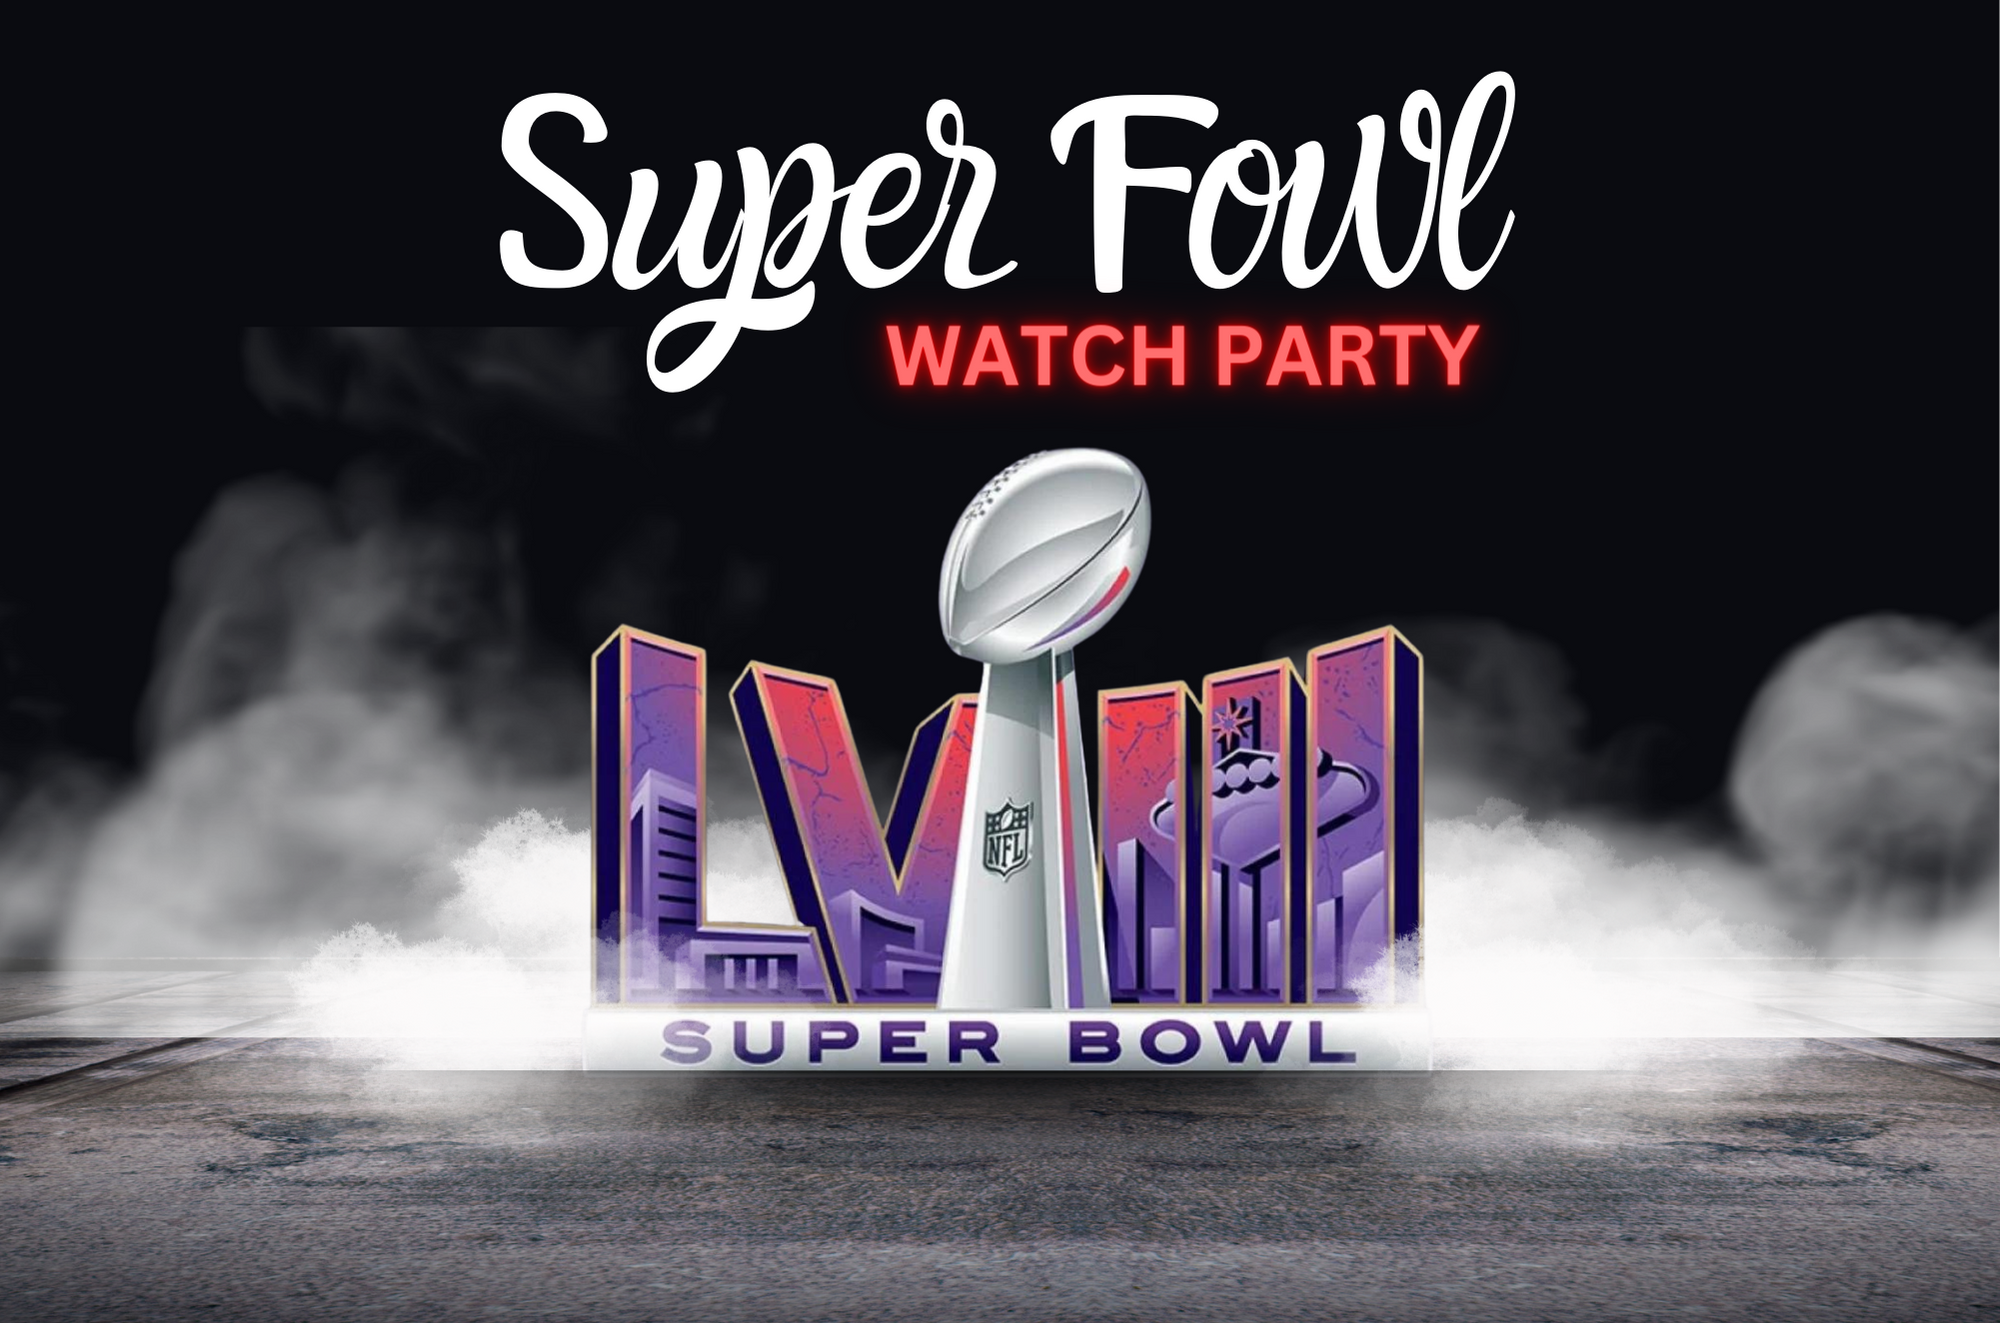 Super Fowl Watch Party at Fowling Warehouse DFW